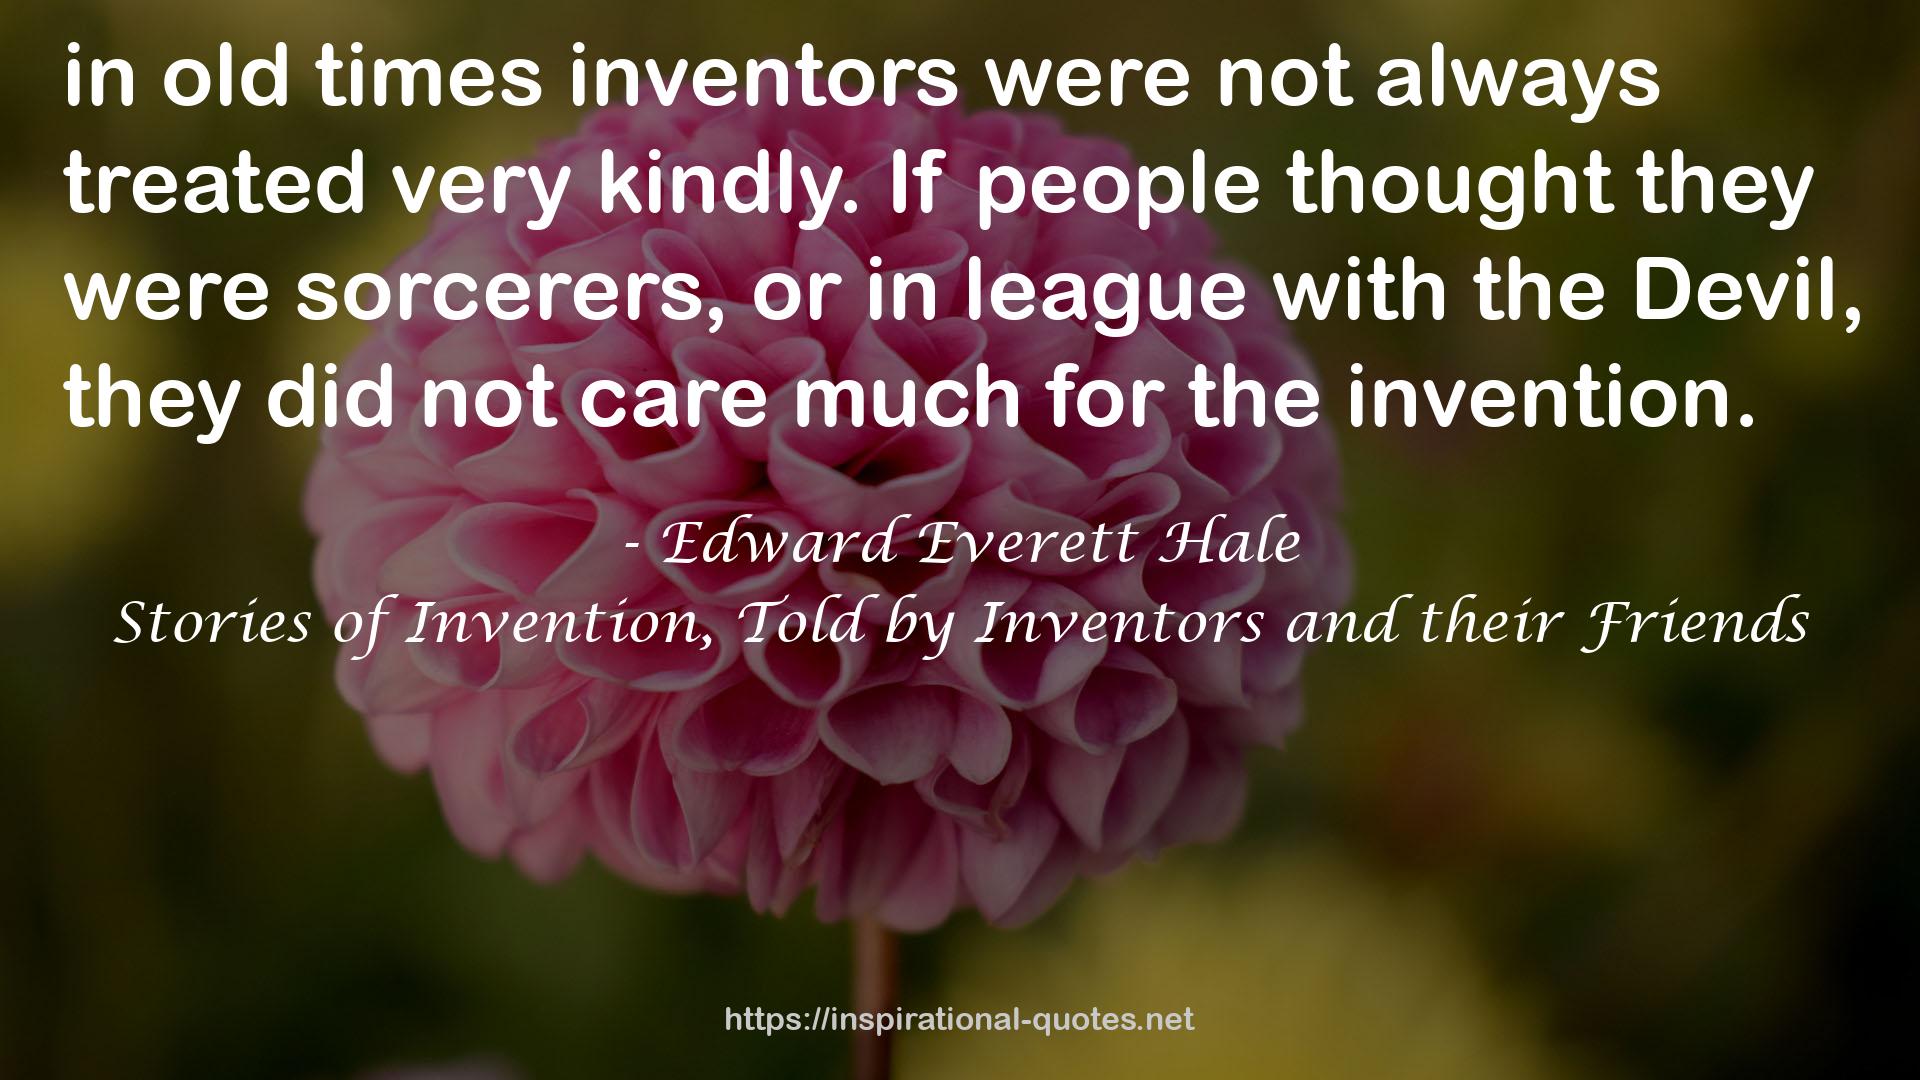 Stories of Invention, Told by Inventors and their Friends QUOTES